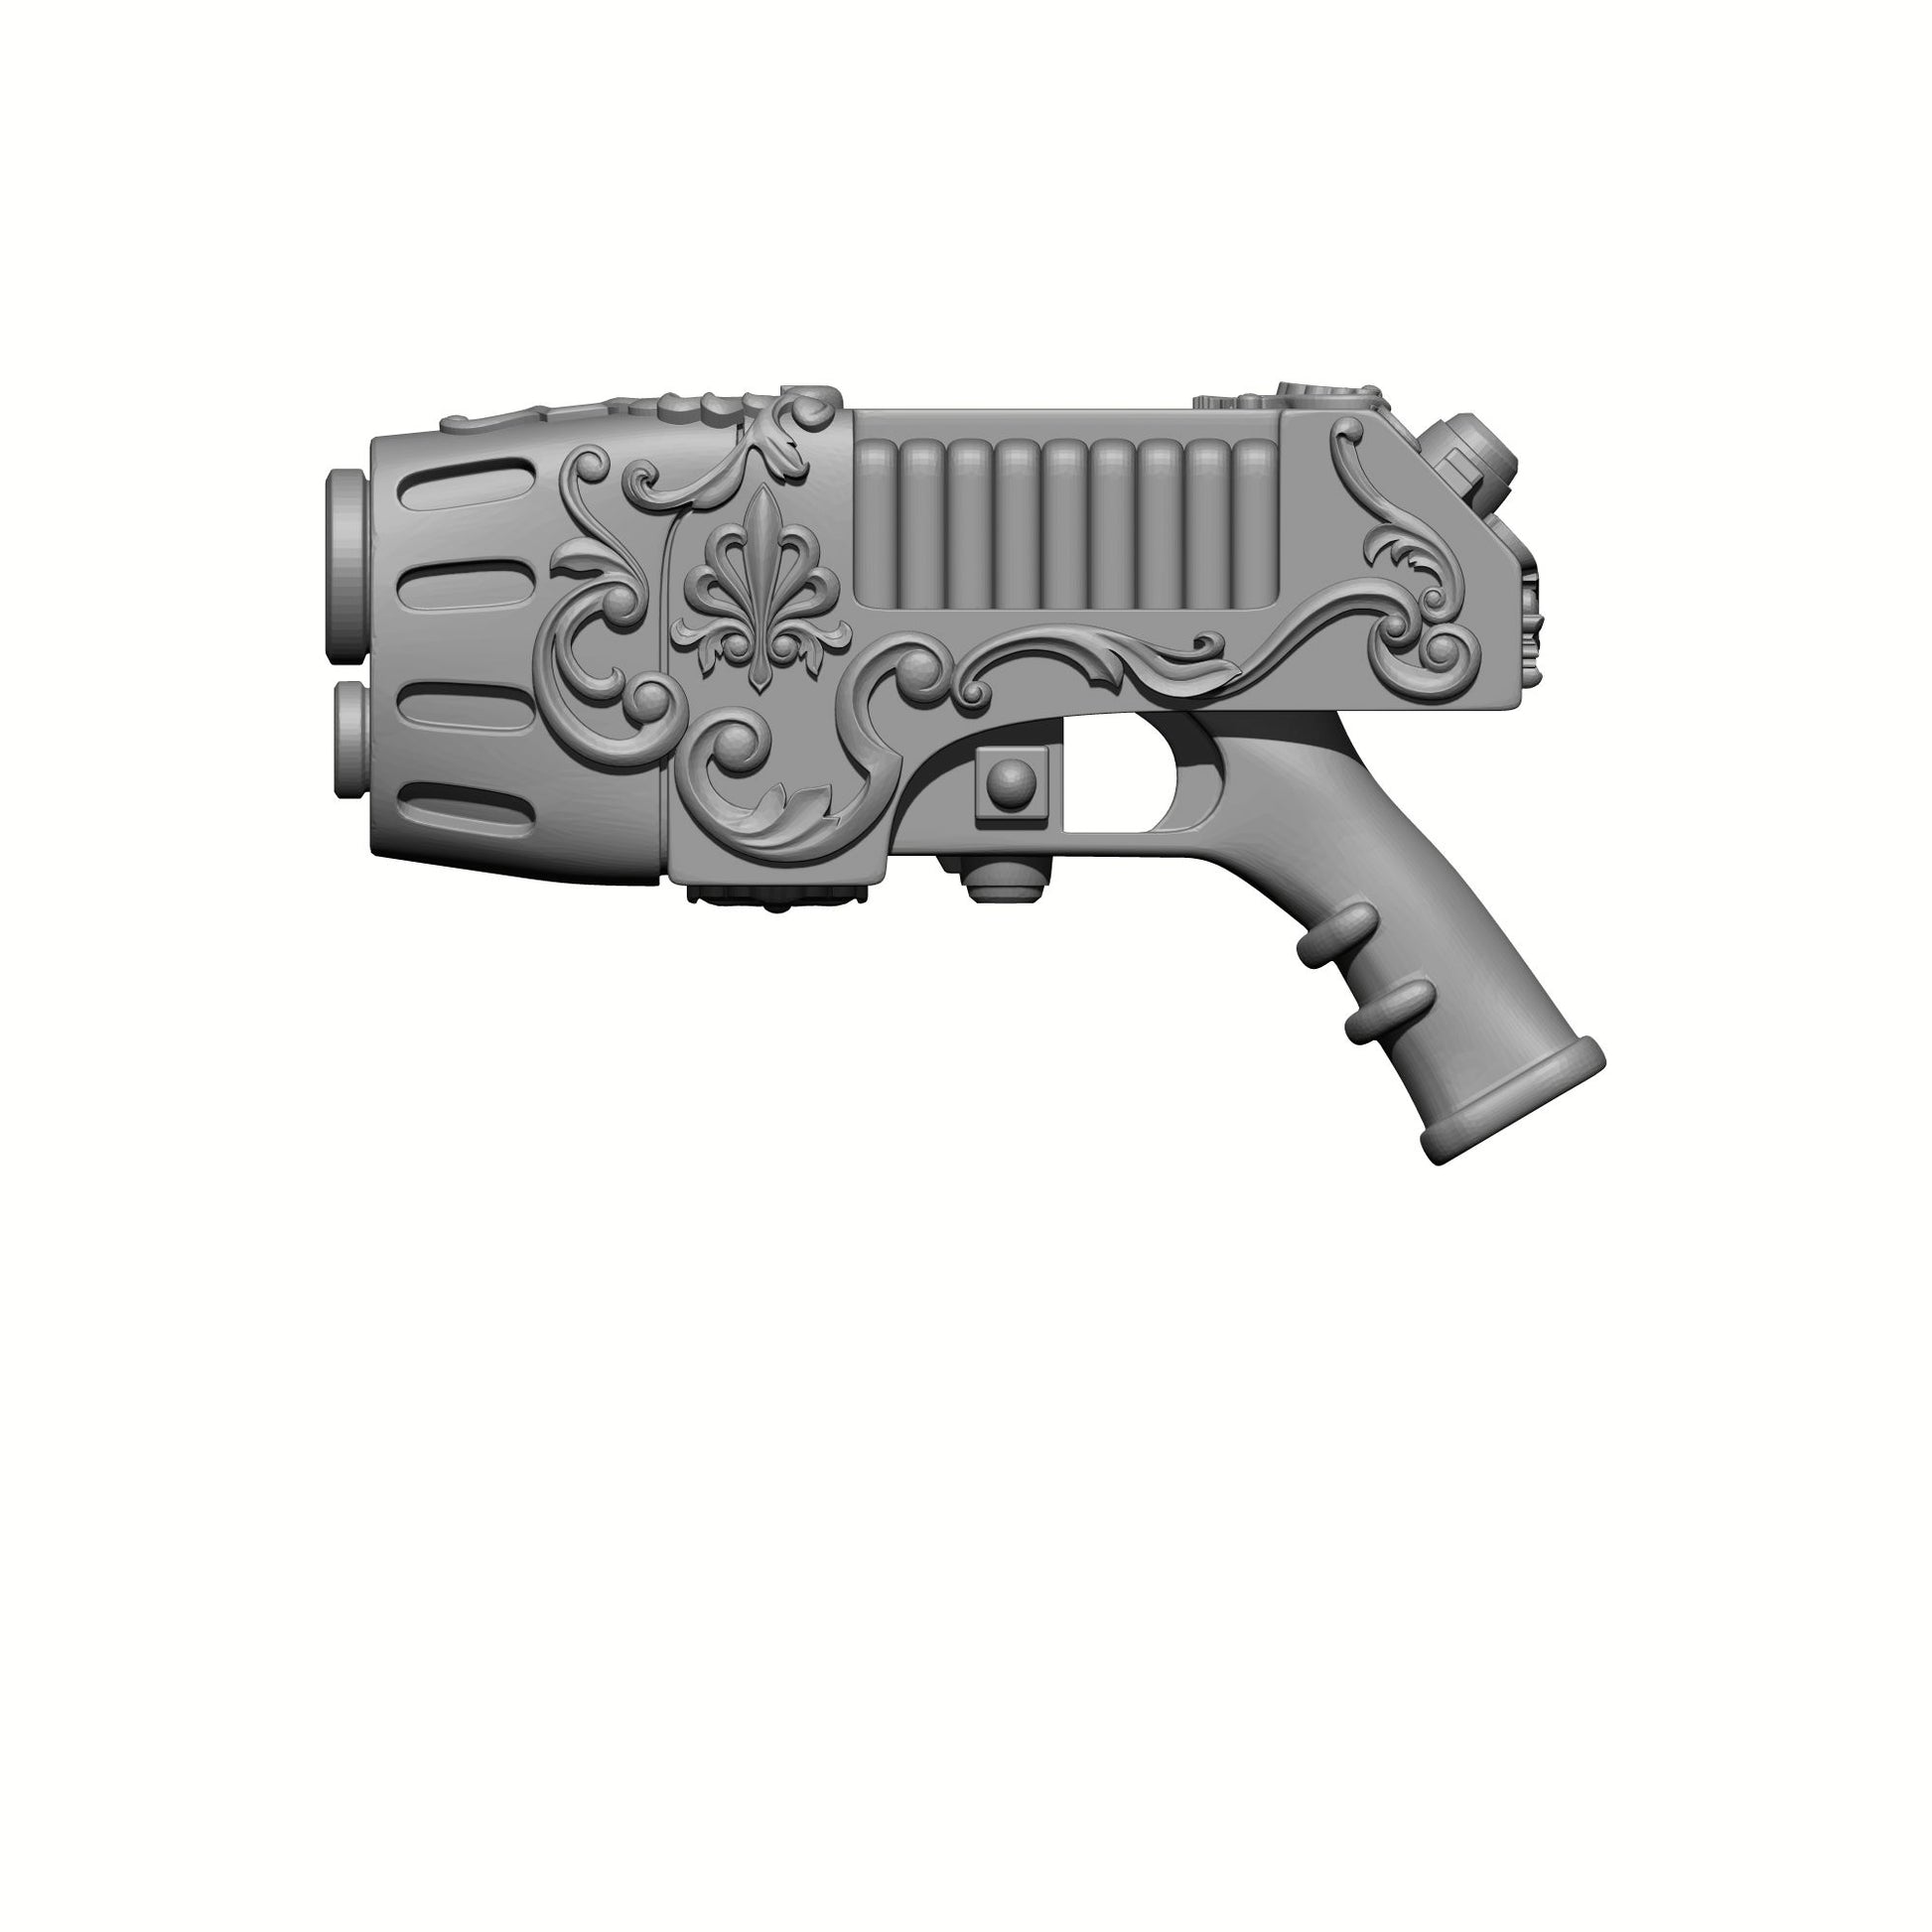 Day of the Dead Chapter Artificer Pattern Plasma Gun compatible with JoyToy Space Marine Action Figures